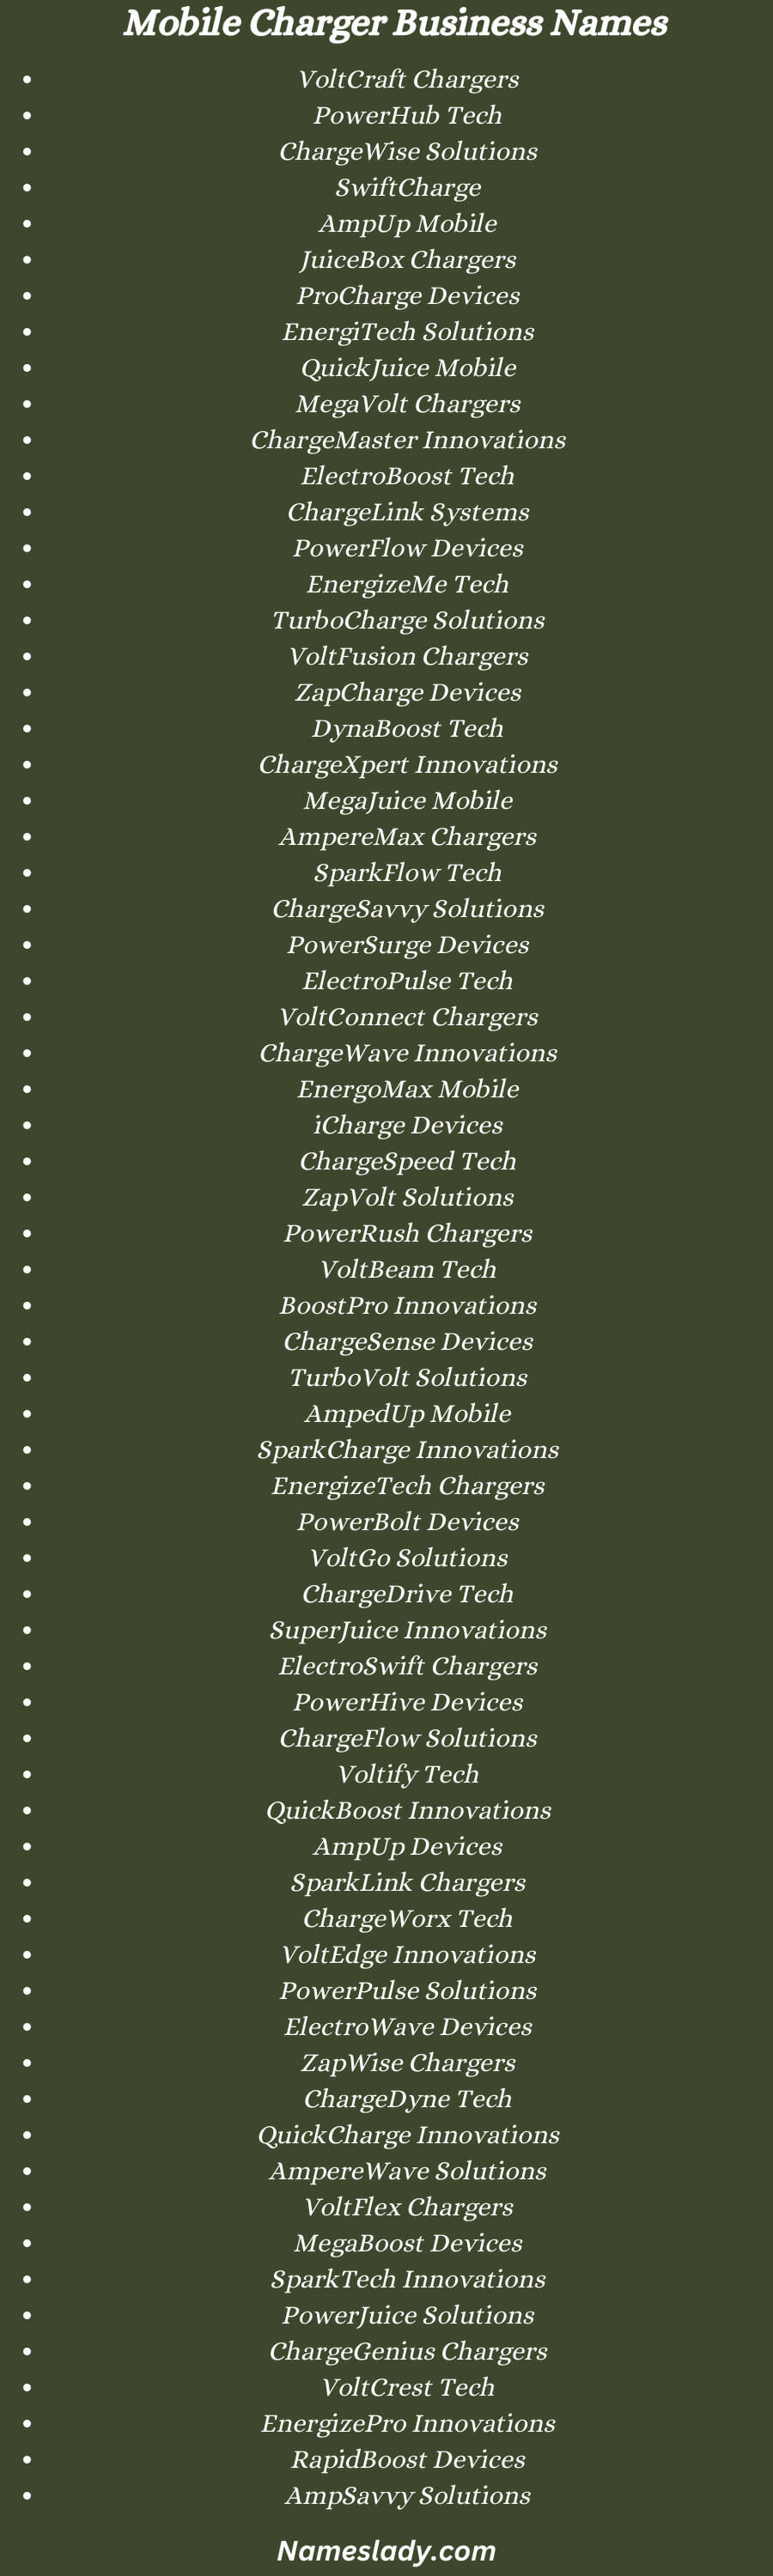 Mobile Charger Business Names